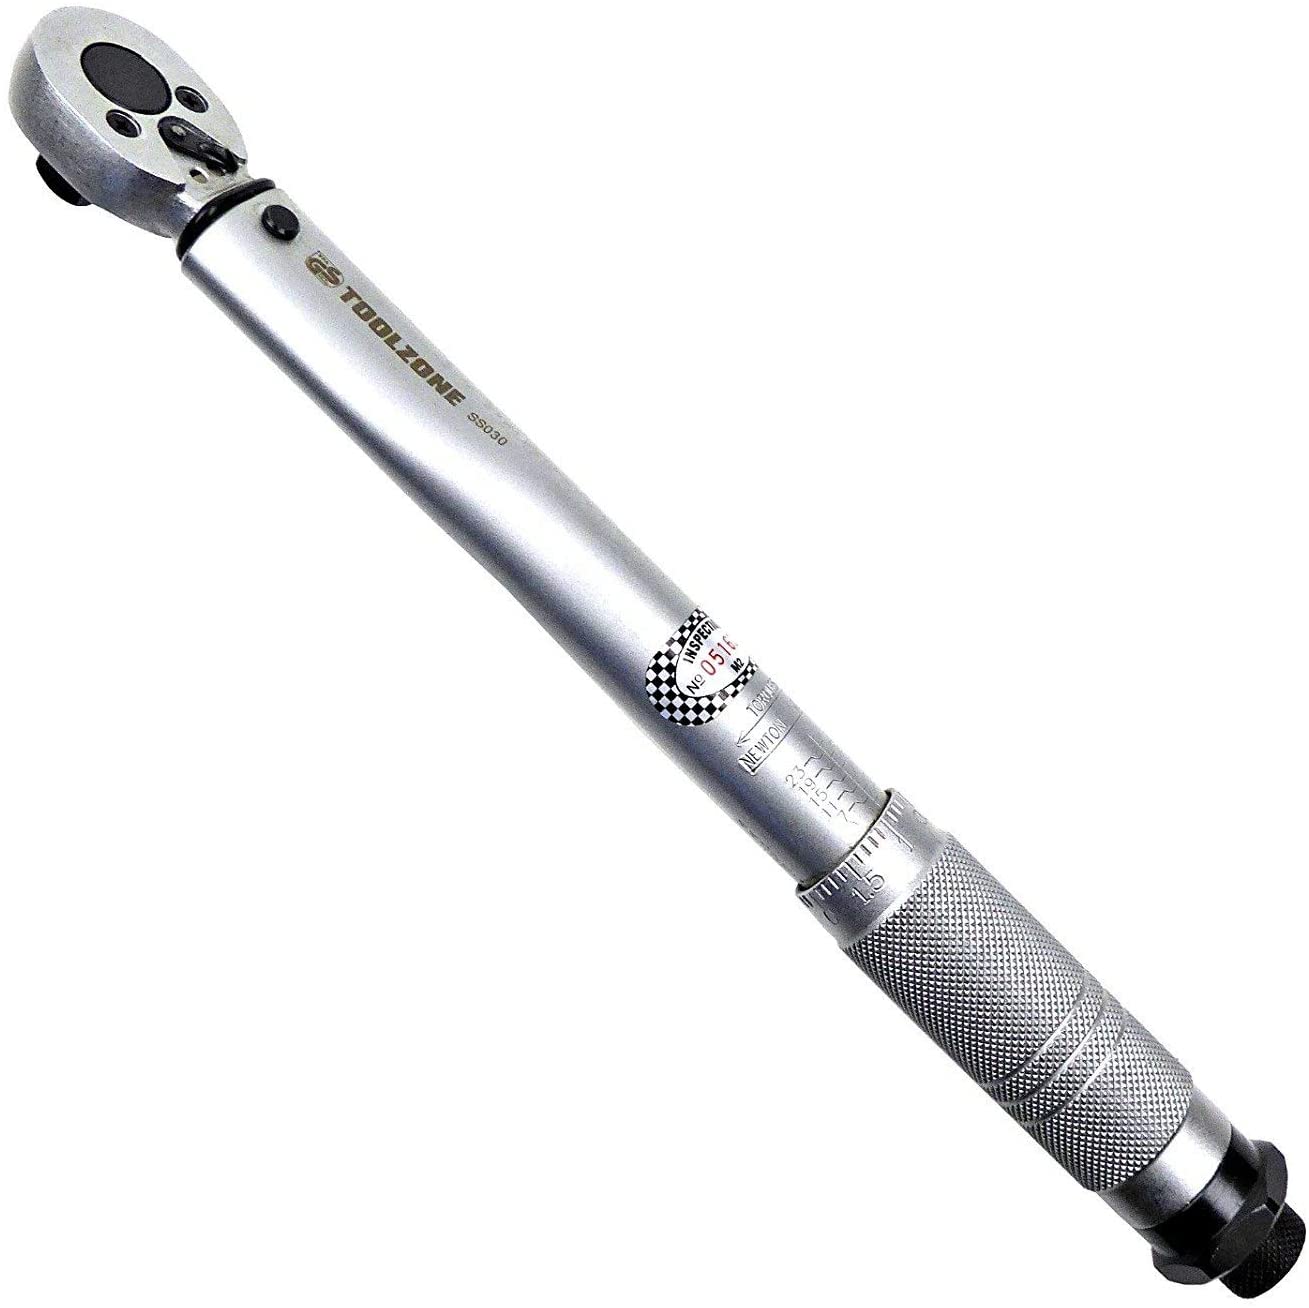 Toolzone SS030 Professional 3/8"" Drive Torque Wrench 5-25 Nm Metric Ratchet